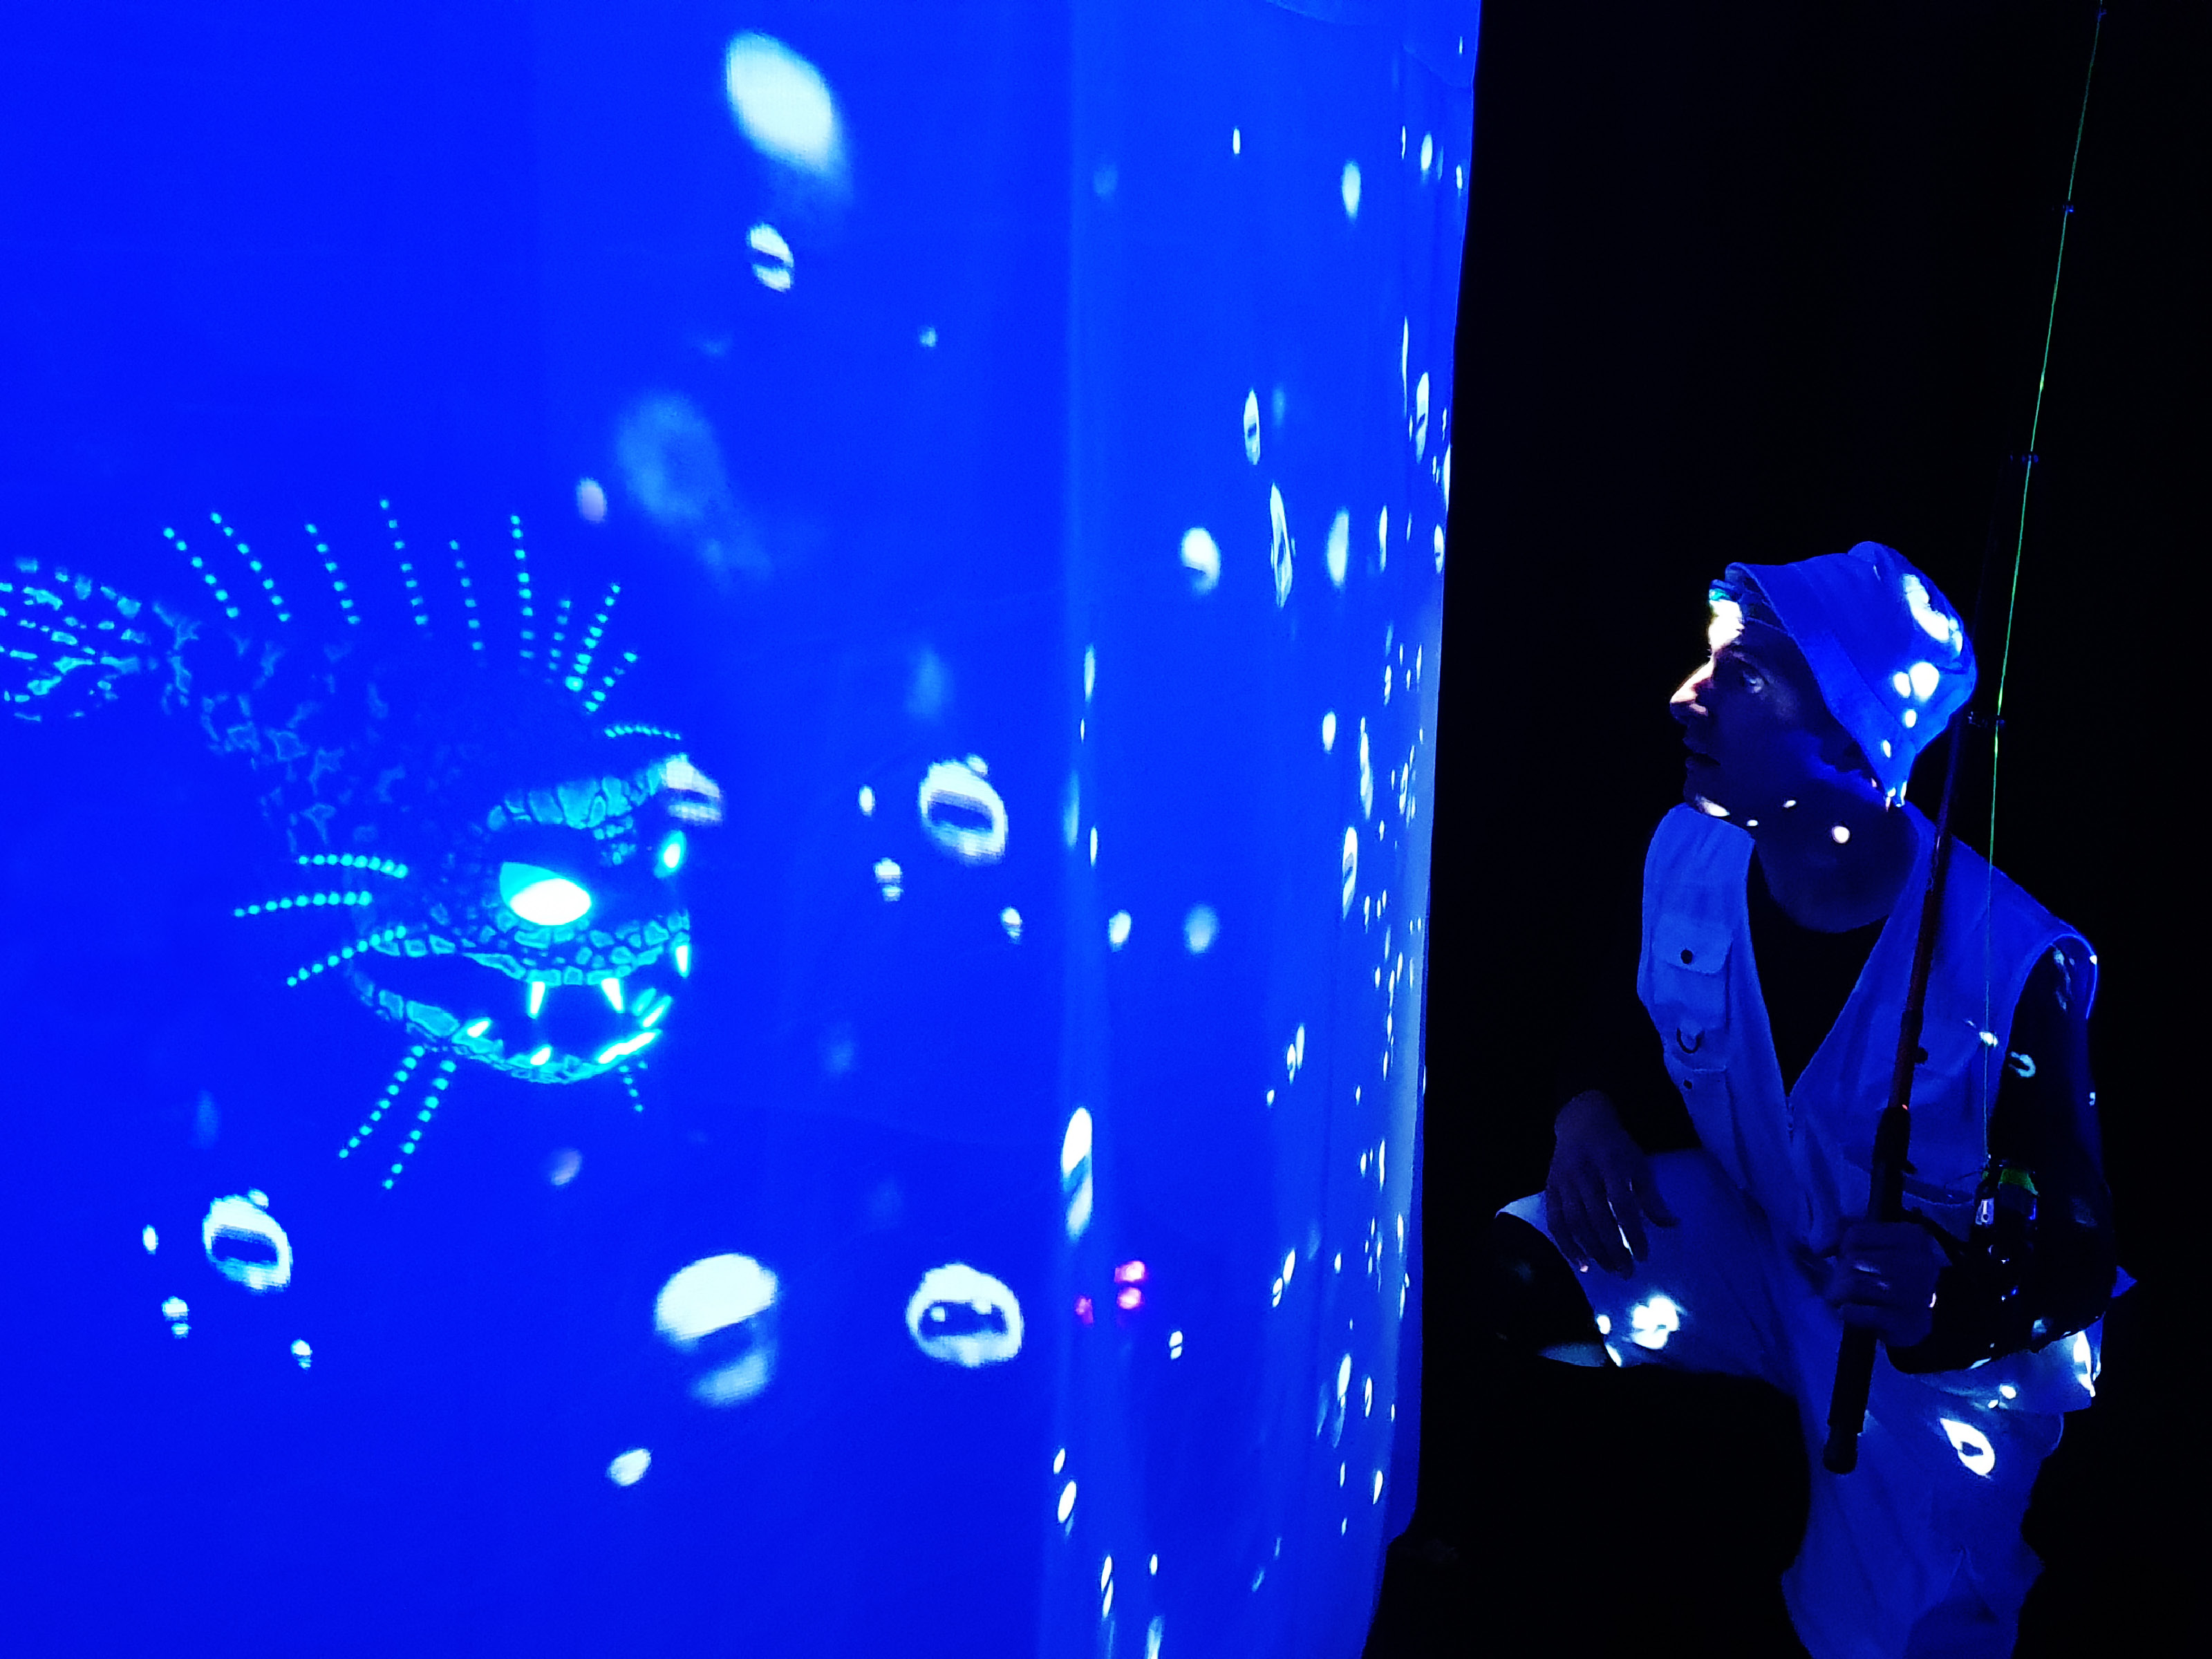 On a white projection surface, a fish with jags and pointed teeth is projected onto a blue background. In front of the fish projection kneels a man with fishing vest, trousers, hat and fishing rod and looks at him.